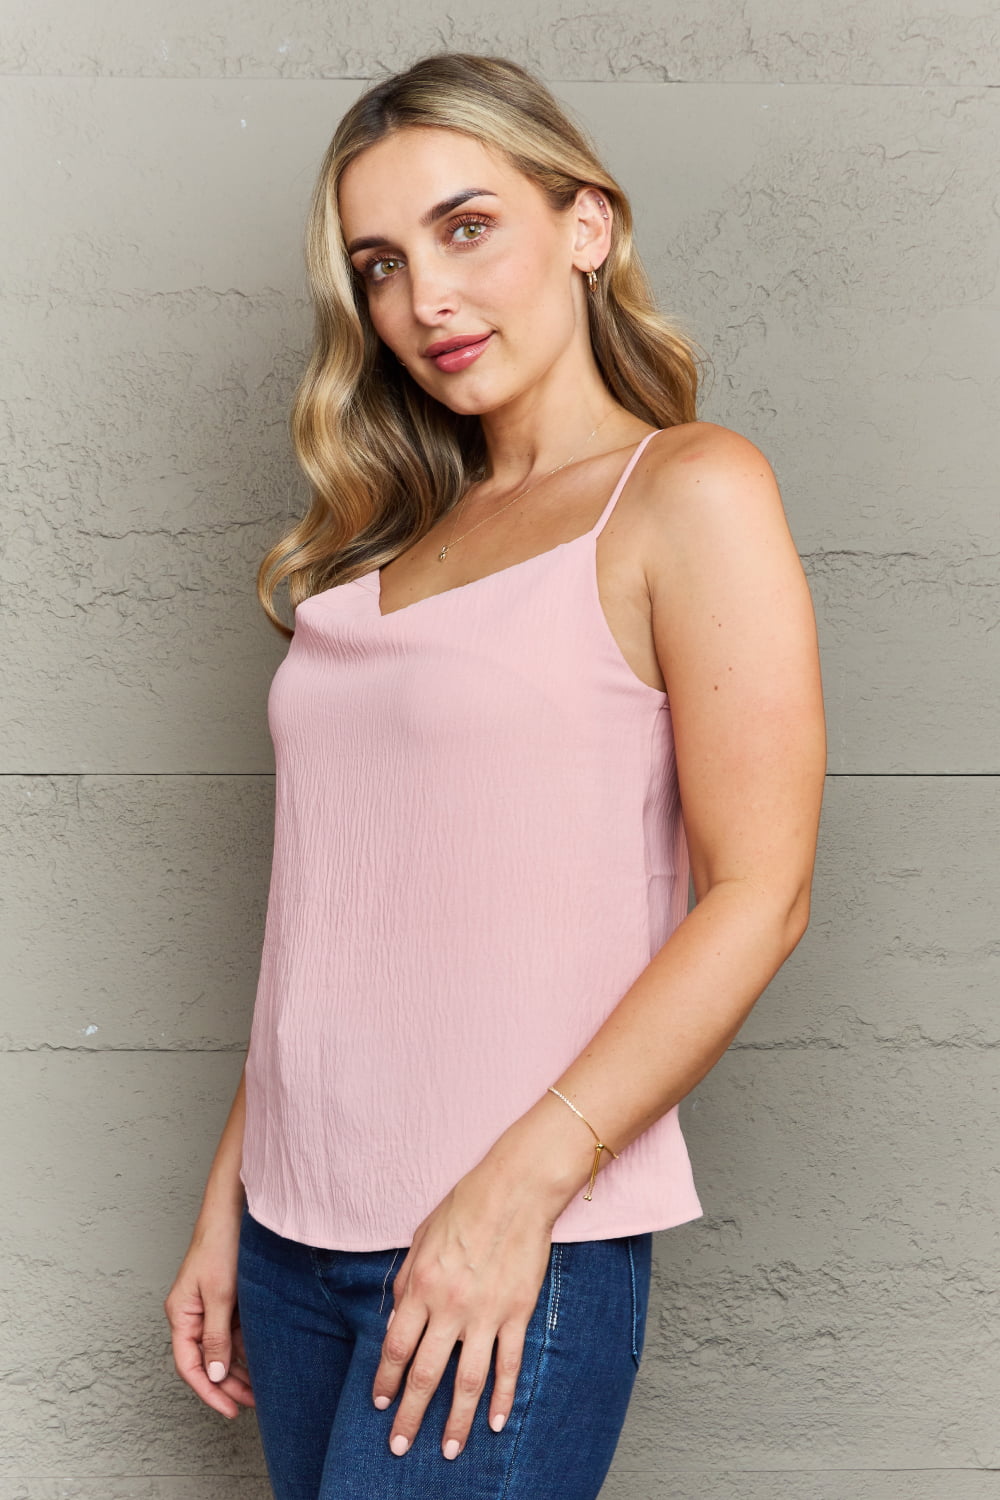 Ninexis For The Weekend Loose Fit Cami - Blush Pink